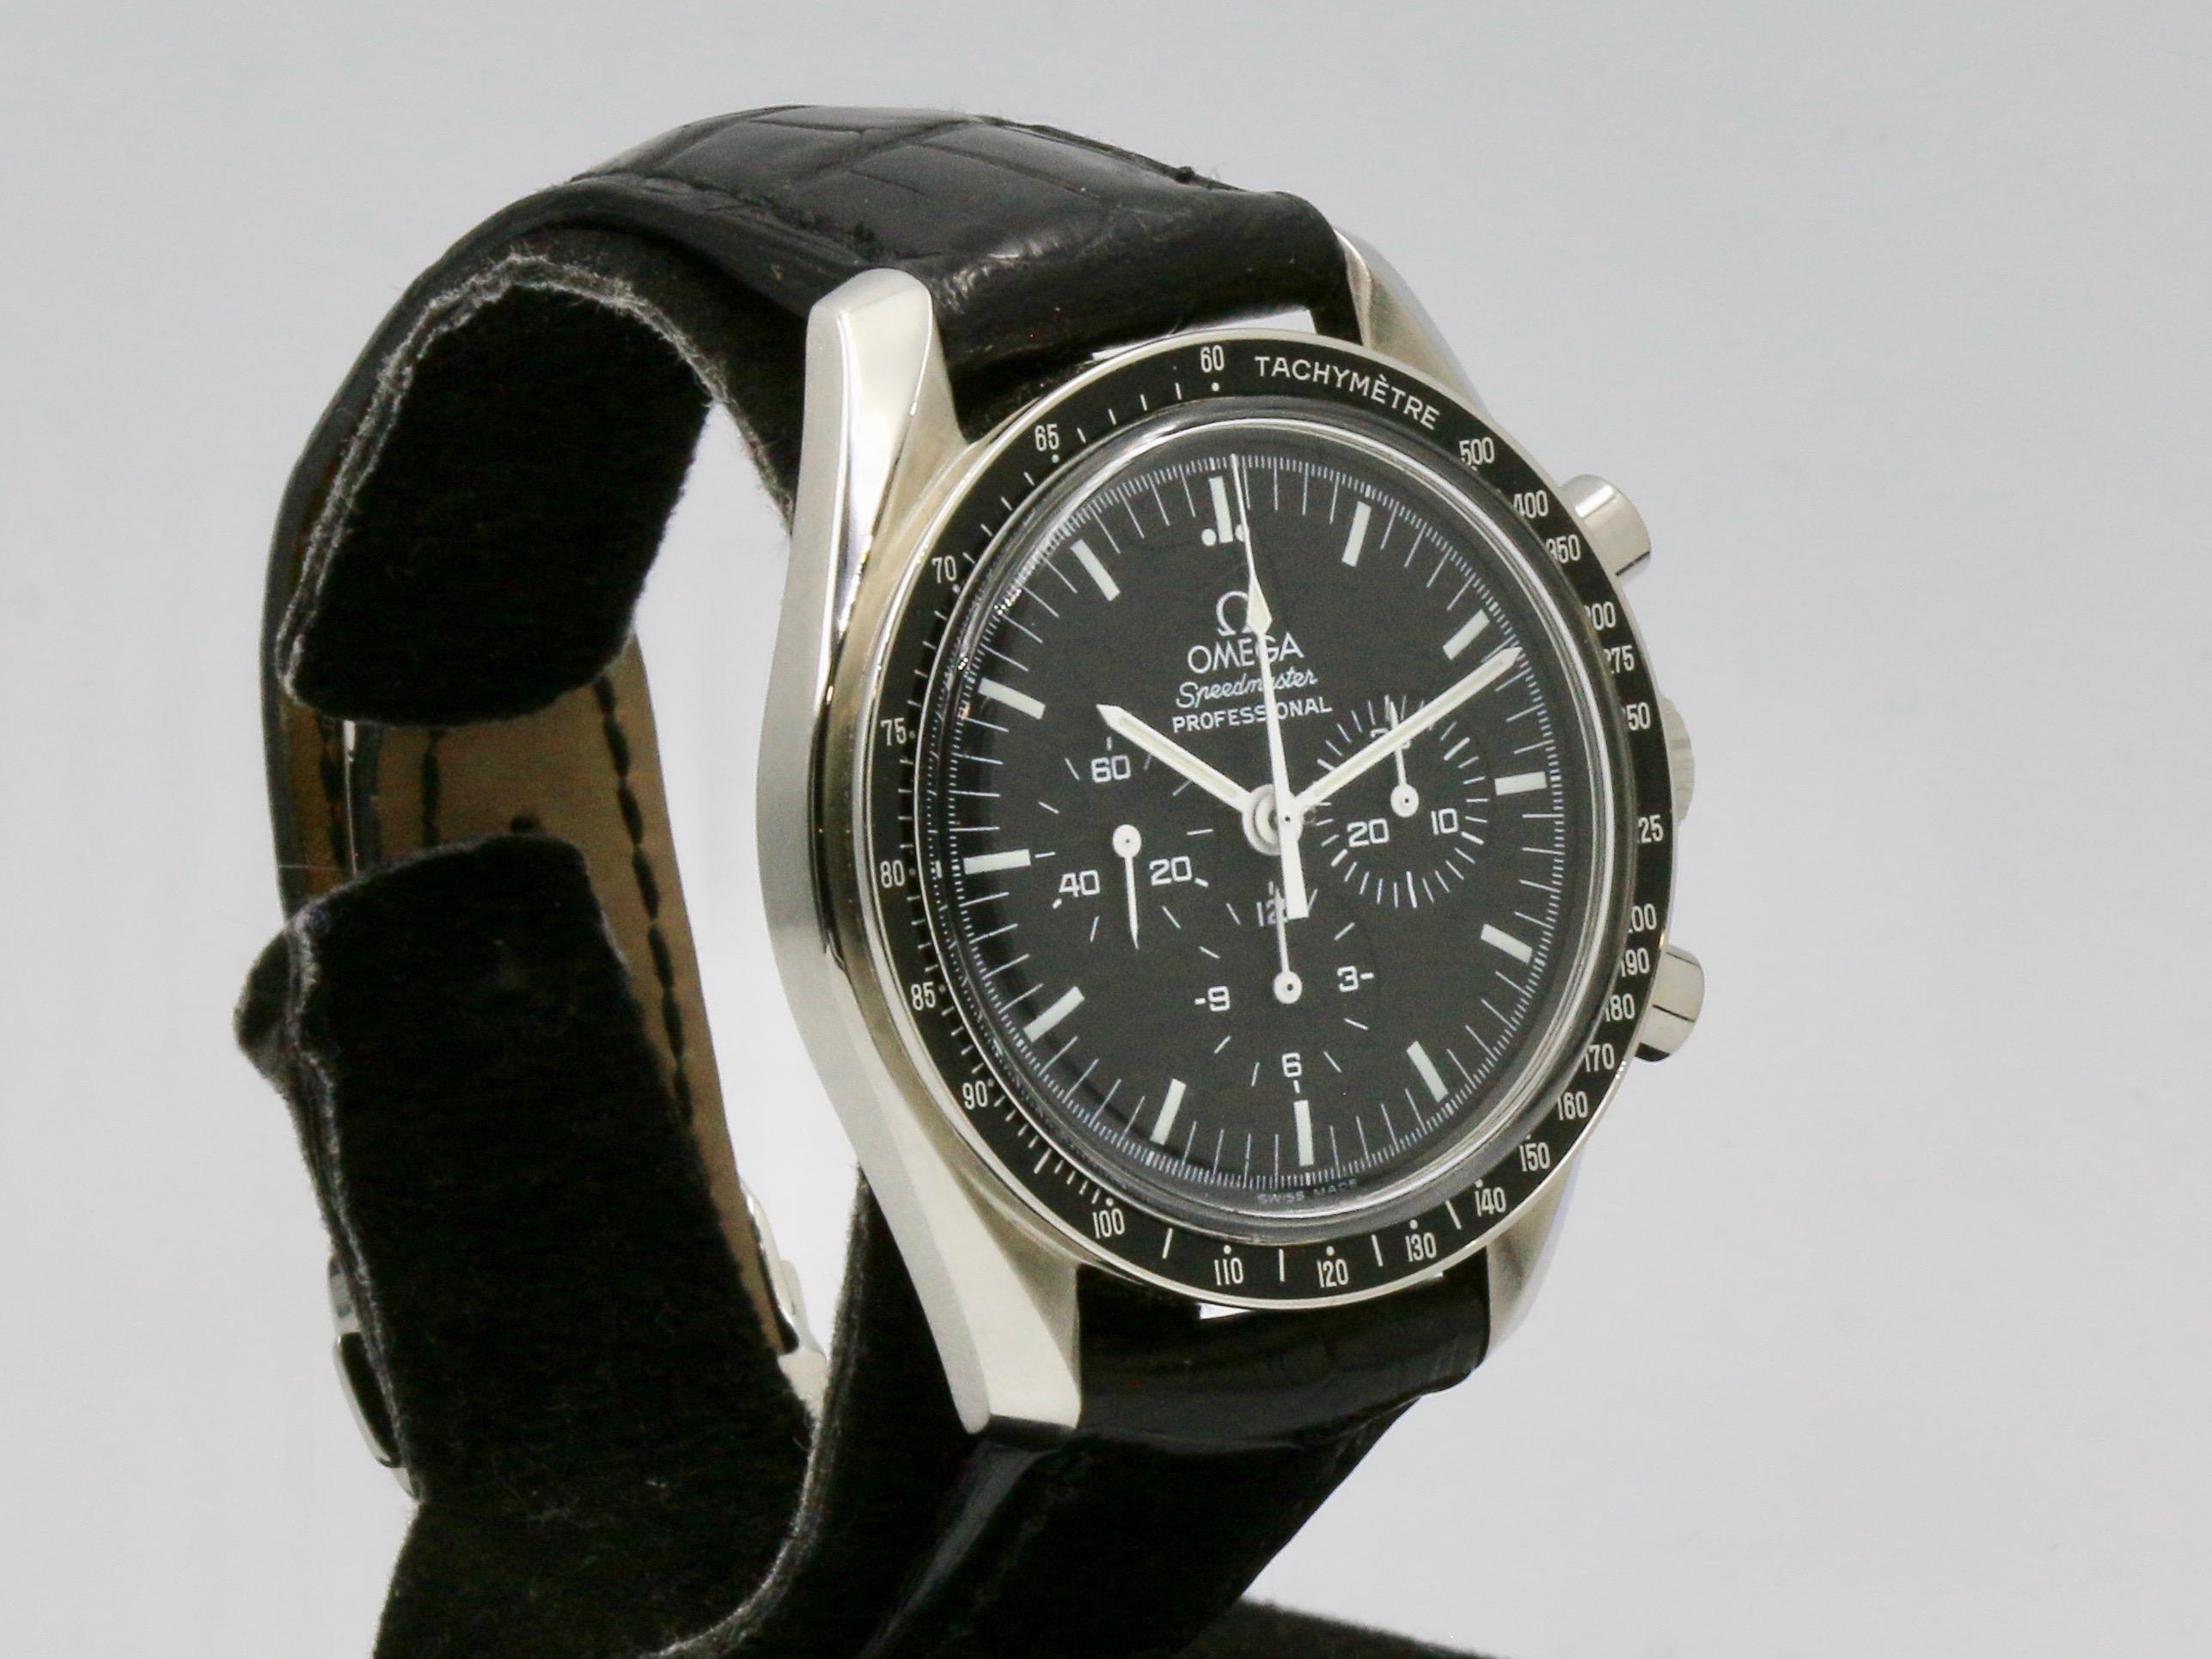 Omega Speedmaster Professional Moonwatch
Reference 3570.50.00
Diameter 42mm
Manual winding
Steel case, leather strap
1 year warranty from date of purchase for malfunction